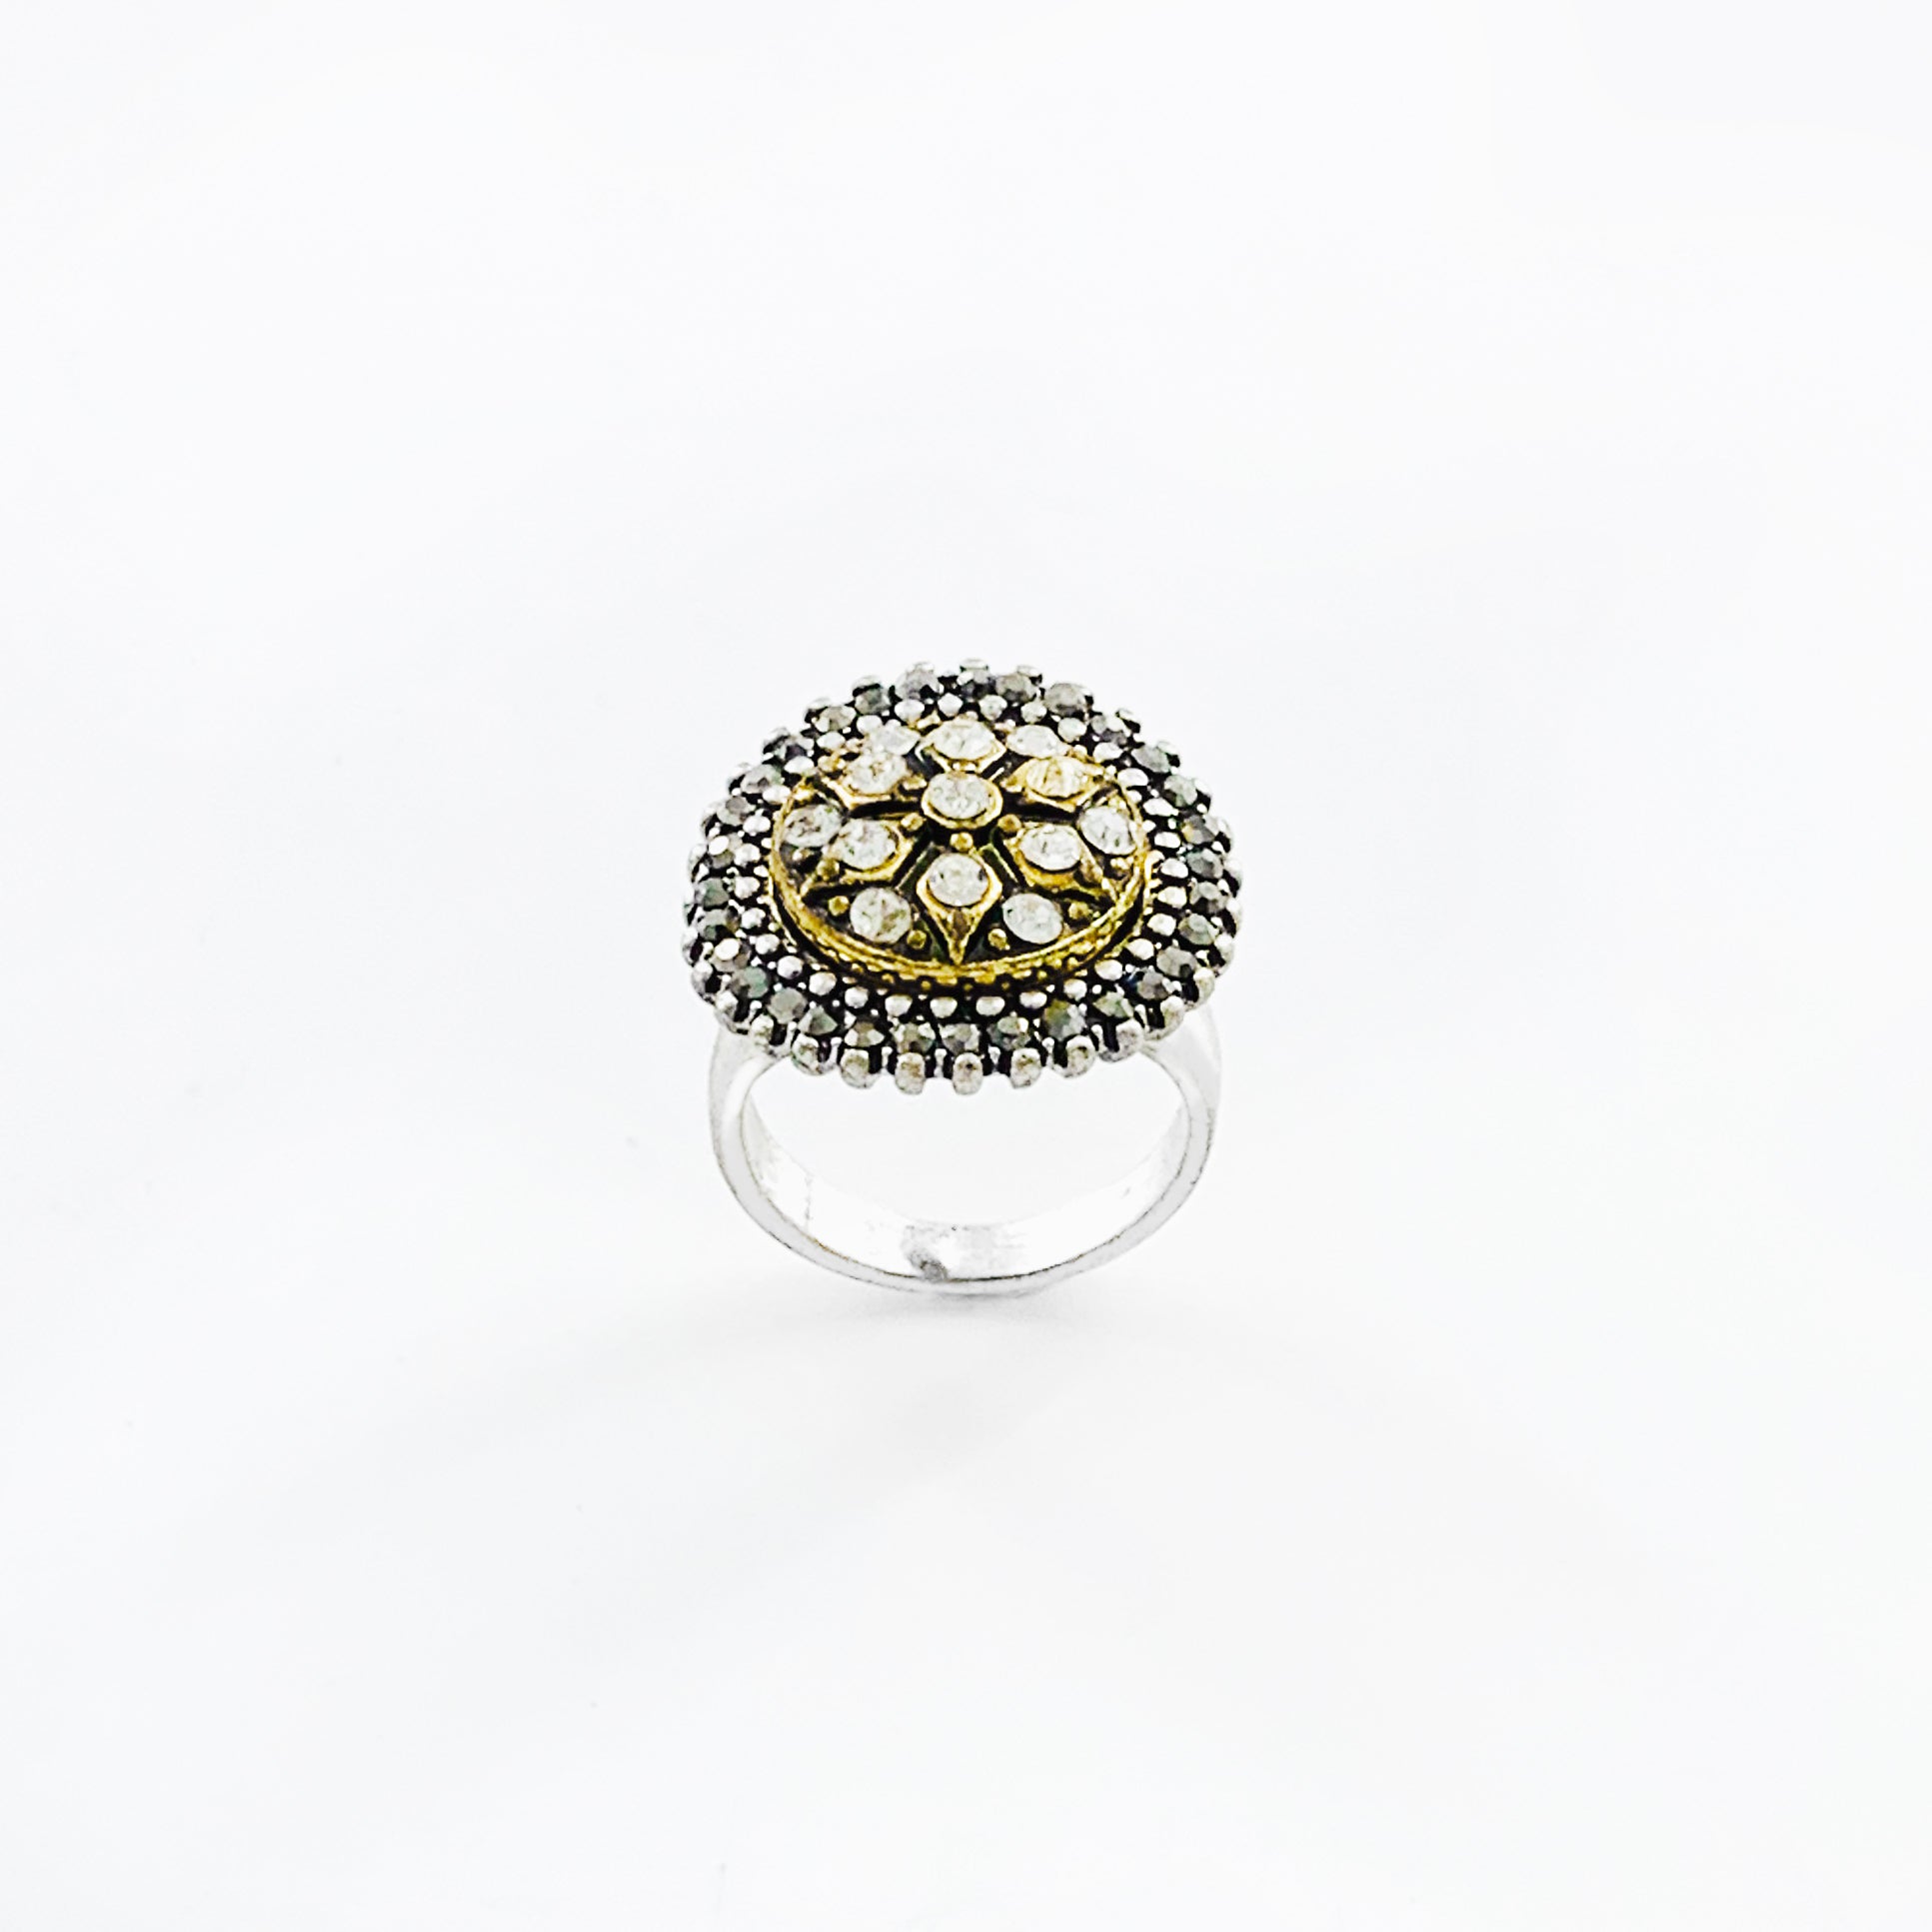 Silver ring with diamante studs in gold and grey